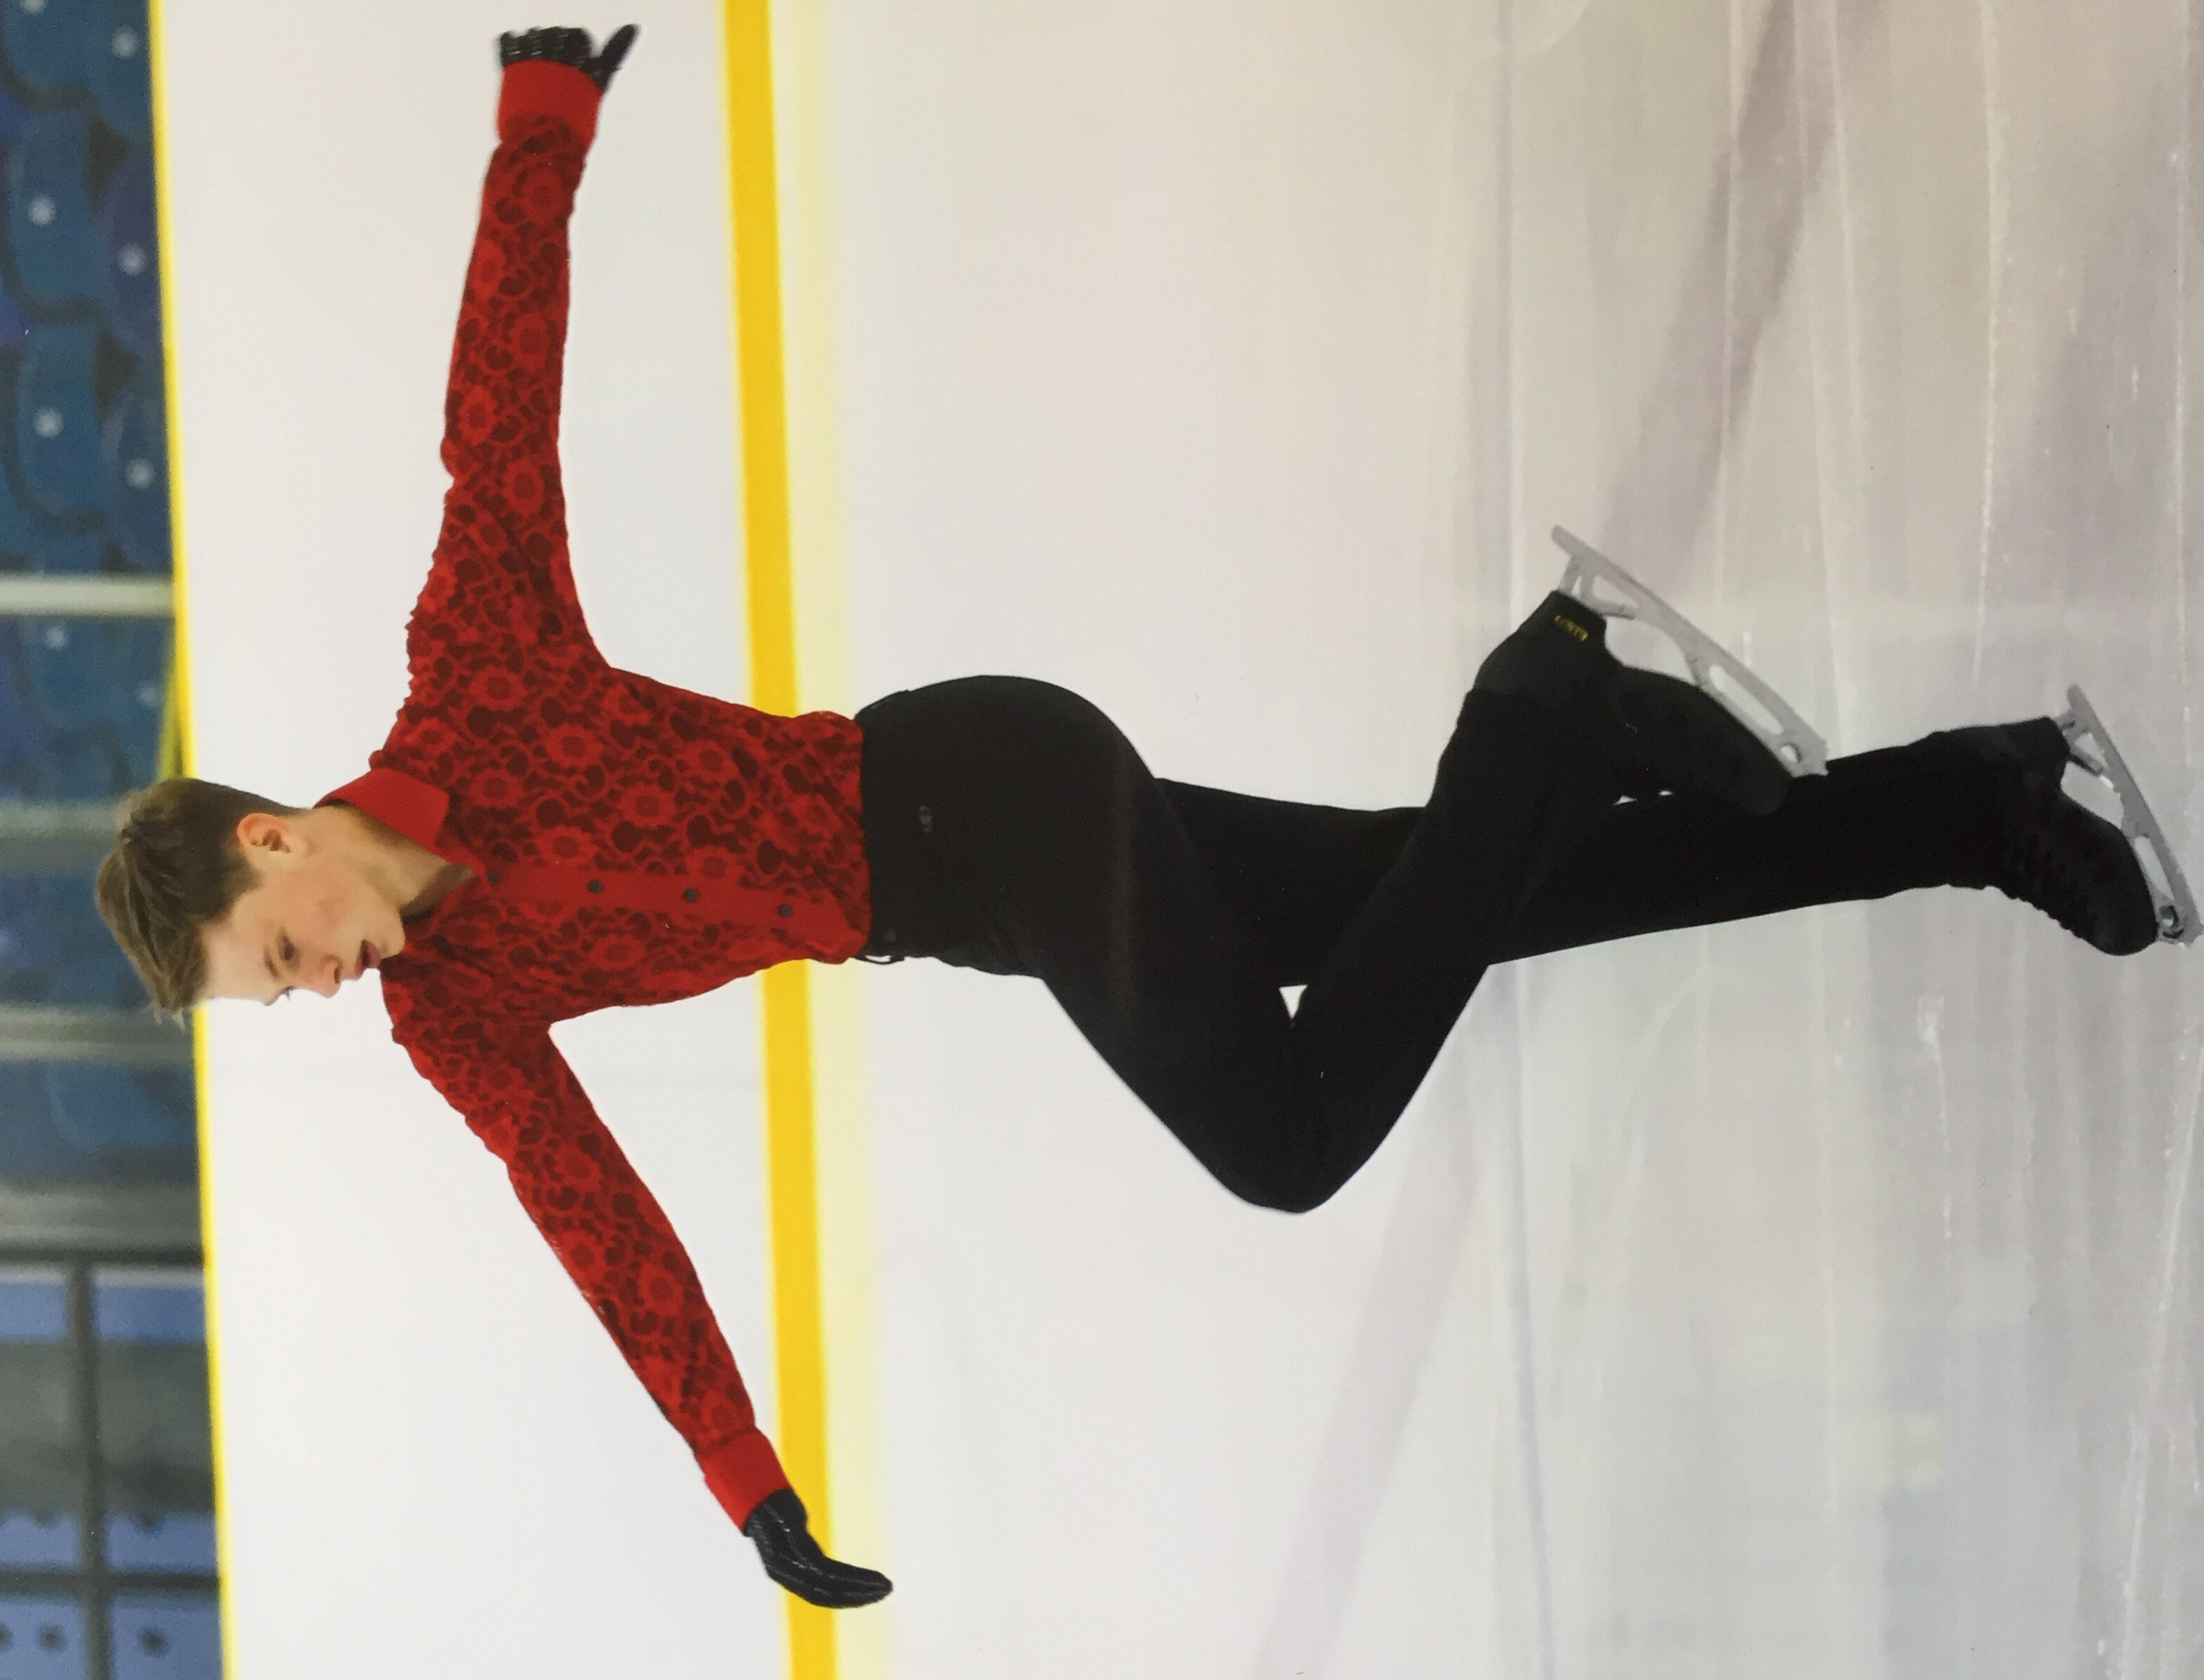 Solo figure skater in red lace body shirt